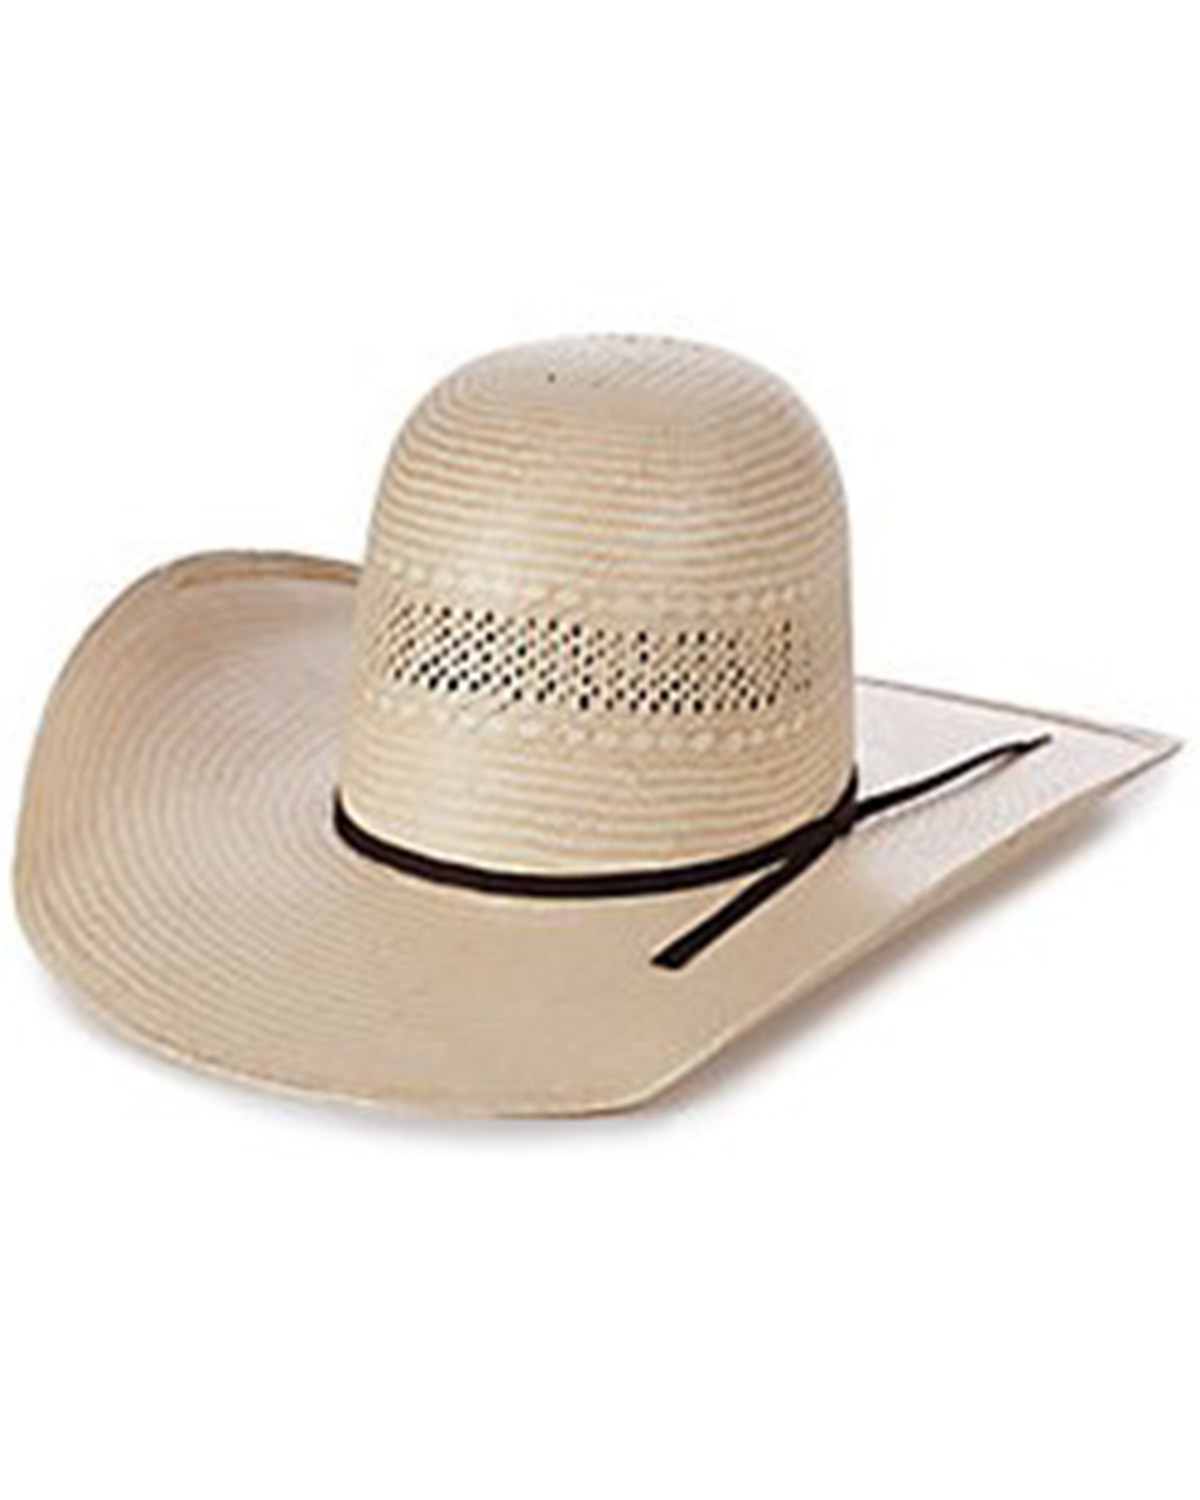 Rodeo King Fort Worth 25X Straw Cowboy Hat